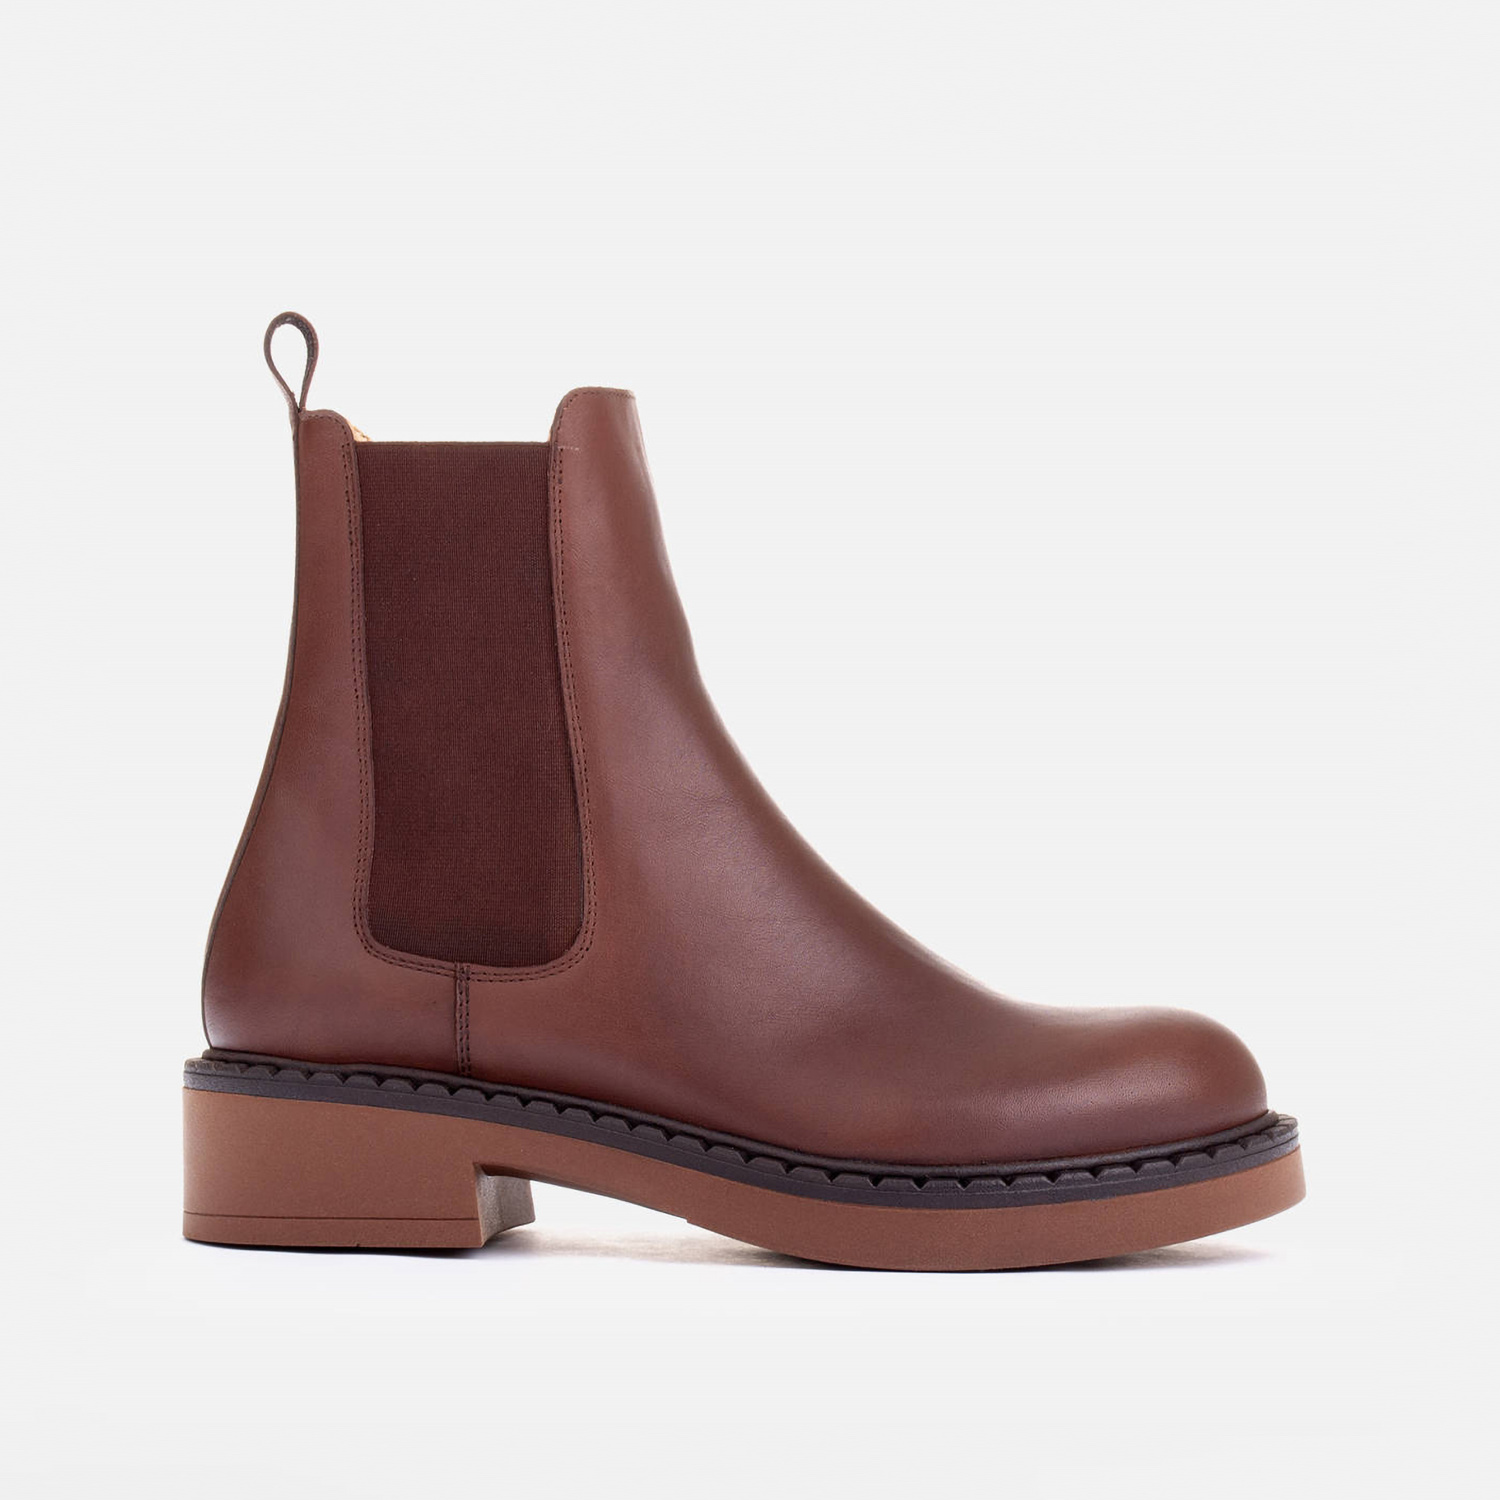 Brown Chelsea boots with a thicker sole